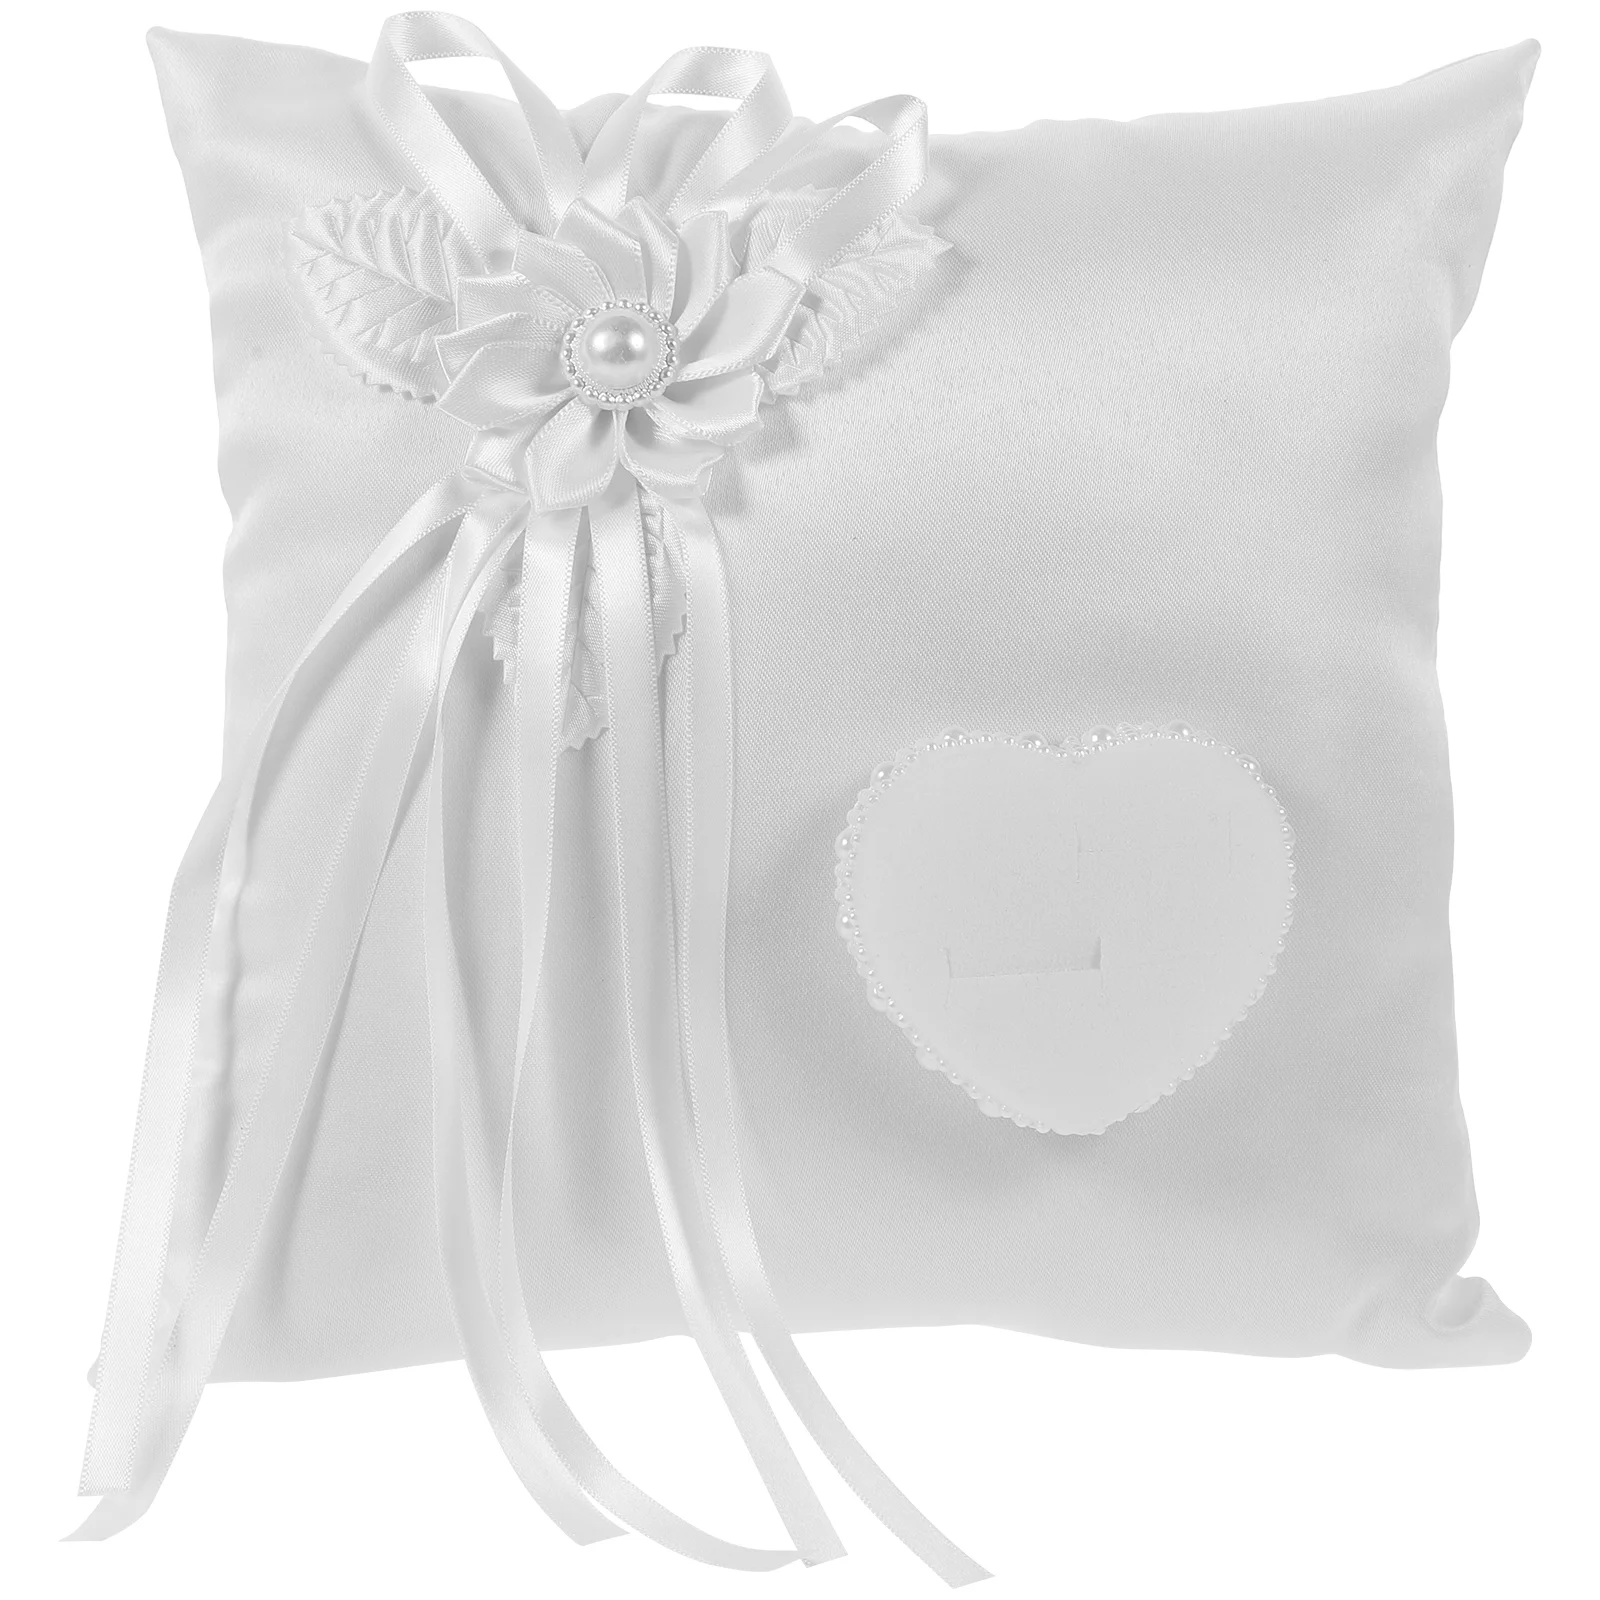 

Ring Pillow Wedding Bearer Cushion Holder Lace Bridal Pillows Box Flower Ceremony White Satin Engagement Marriage Pearl Jewelry